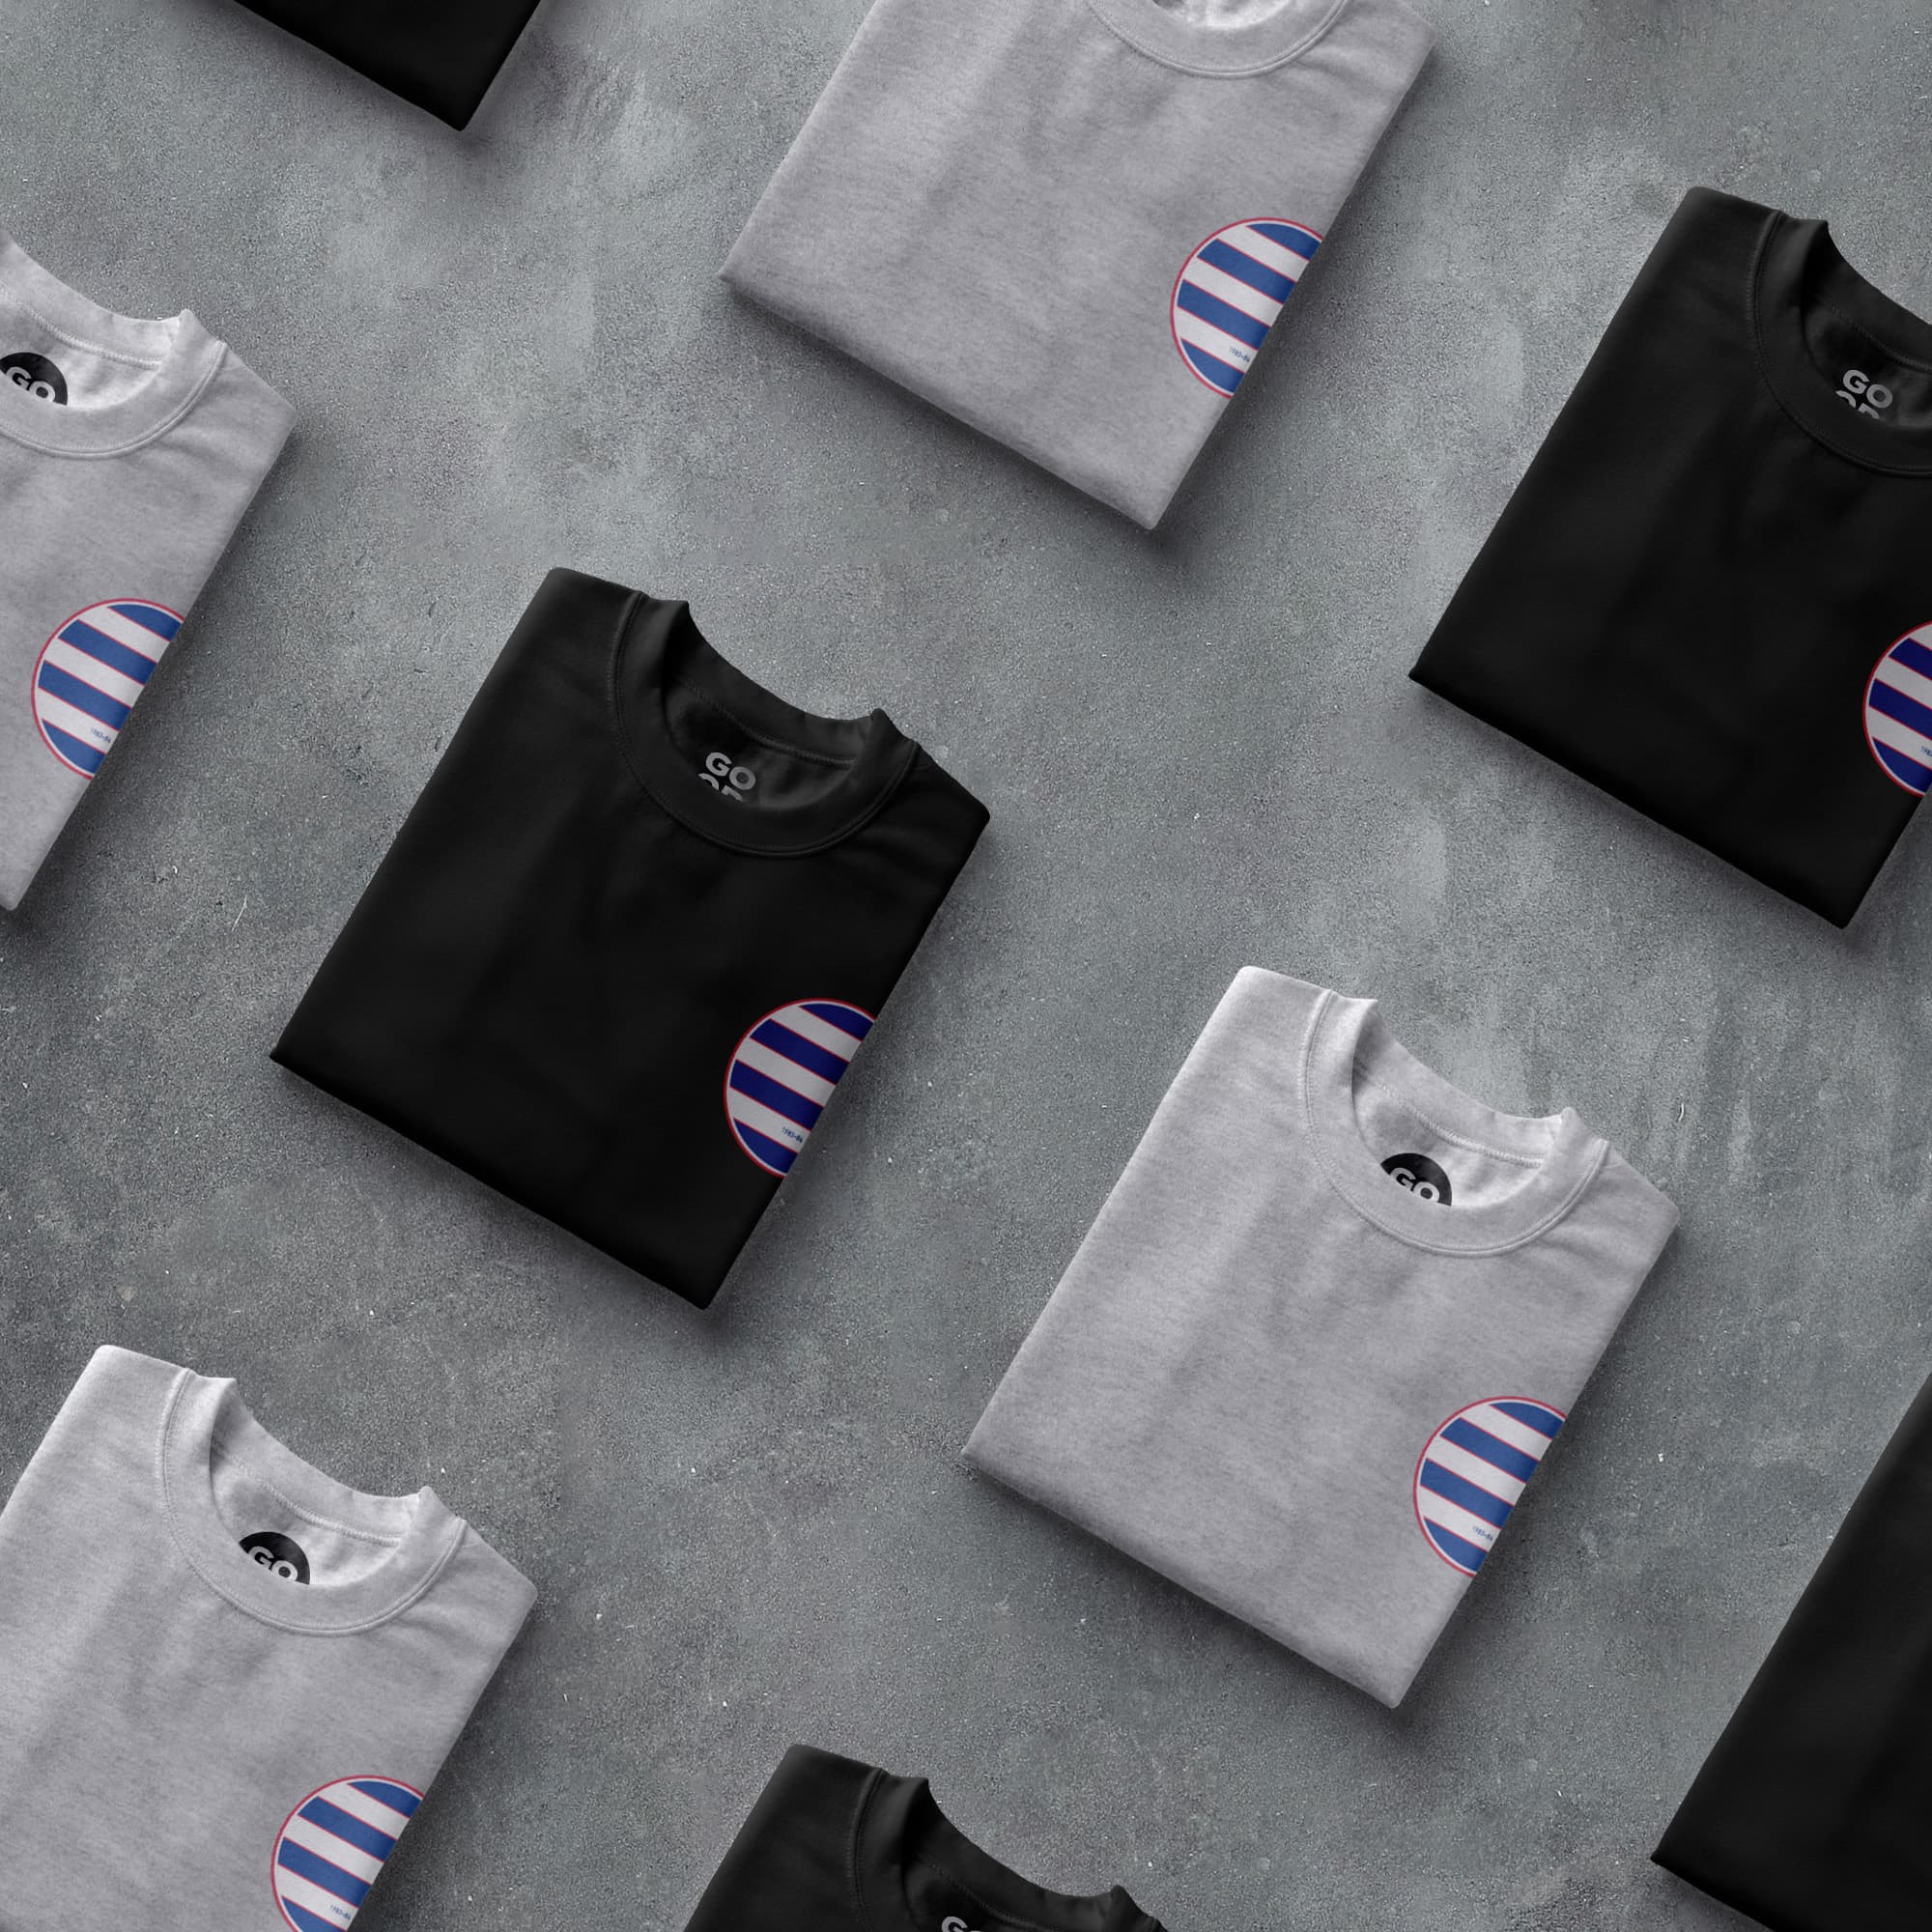 a group of black and white shirts with blue and white stripes